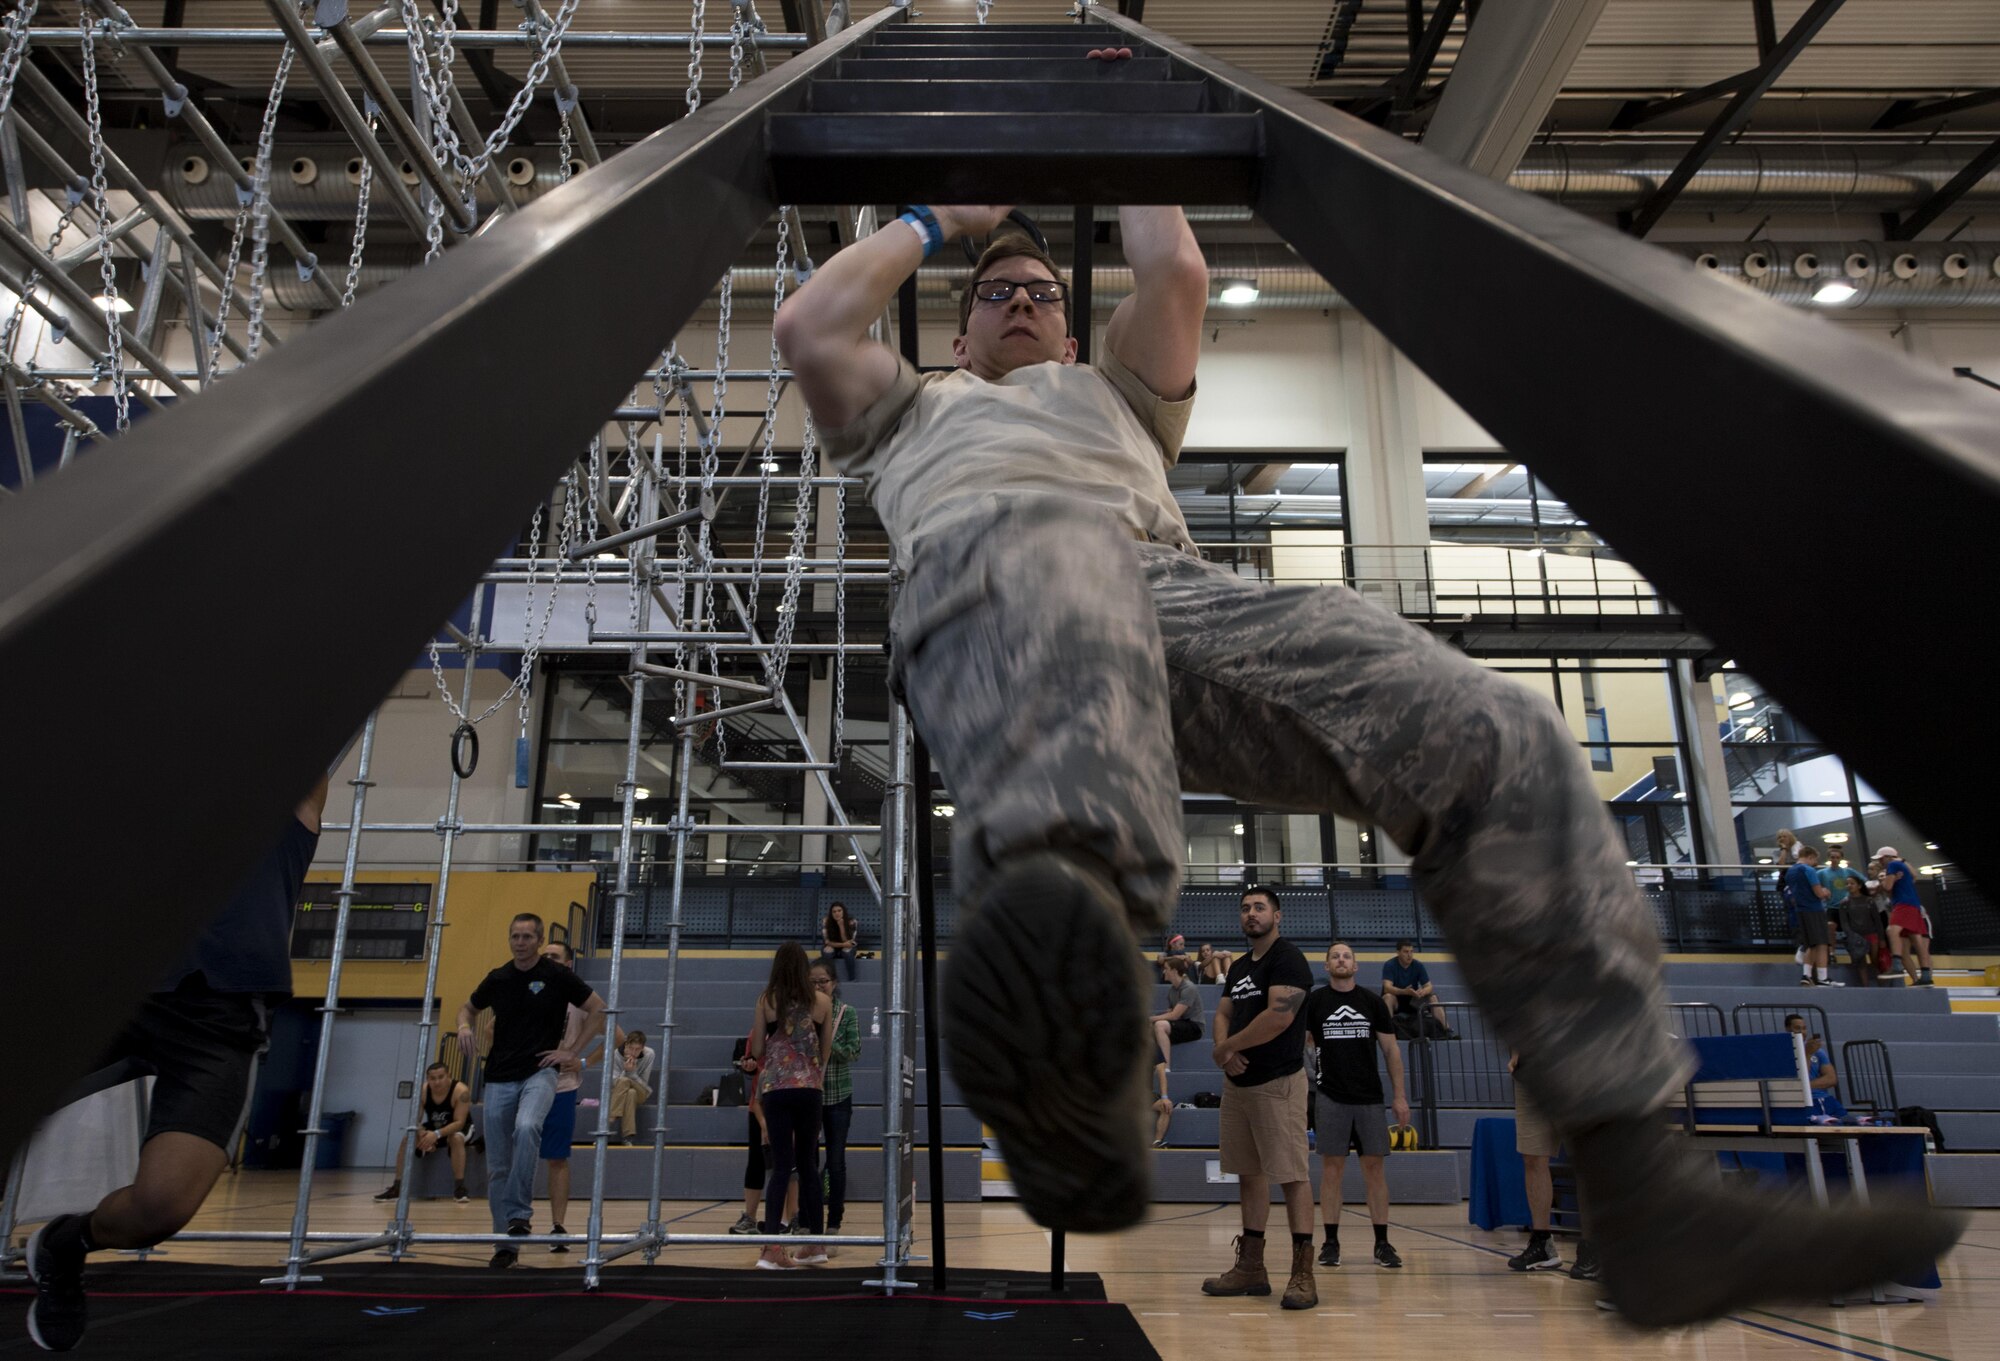 U.S. Air Force Staff Sgt. Cory Aita, 86th Communications Squadron program manager, climbs down the ladder portion of the Alpha Warrior’s Battle Rig obstacle course during the Alpha Warrior Meet/Greet and Familiarization Tour on Ramstein Air Base, Germany, Sept. 22, 2017. Aita was the top male competitor for the Alpha Warrior regional competition held on Sept. 23, 2017, with a run time of one minute and five seconds. (U.S. Air Force photo by Senior Airman Tryphena Mayhugh)